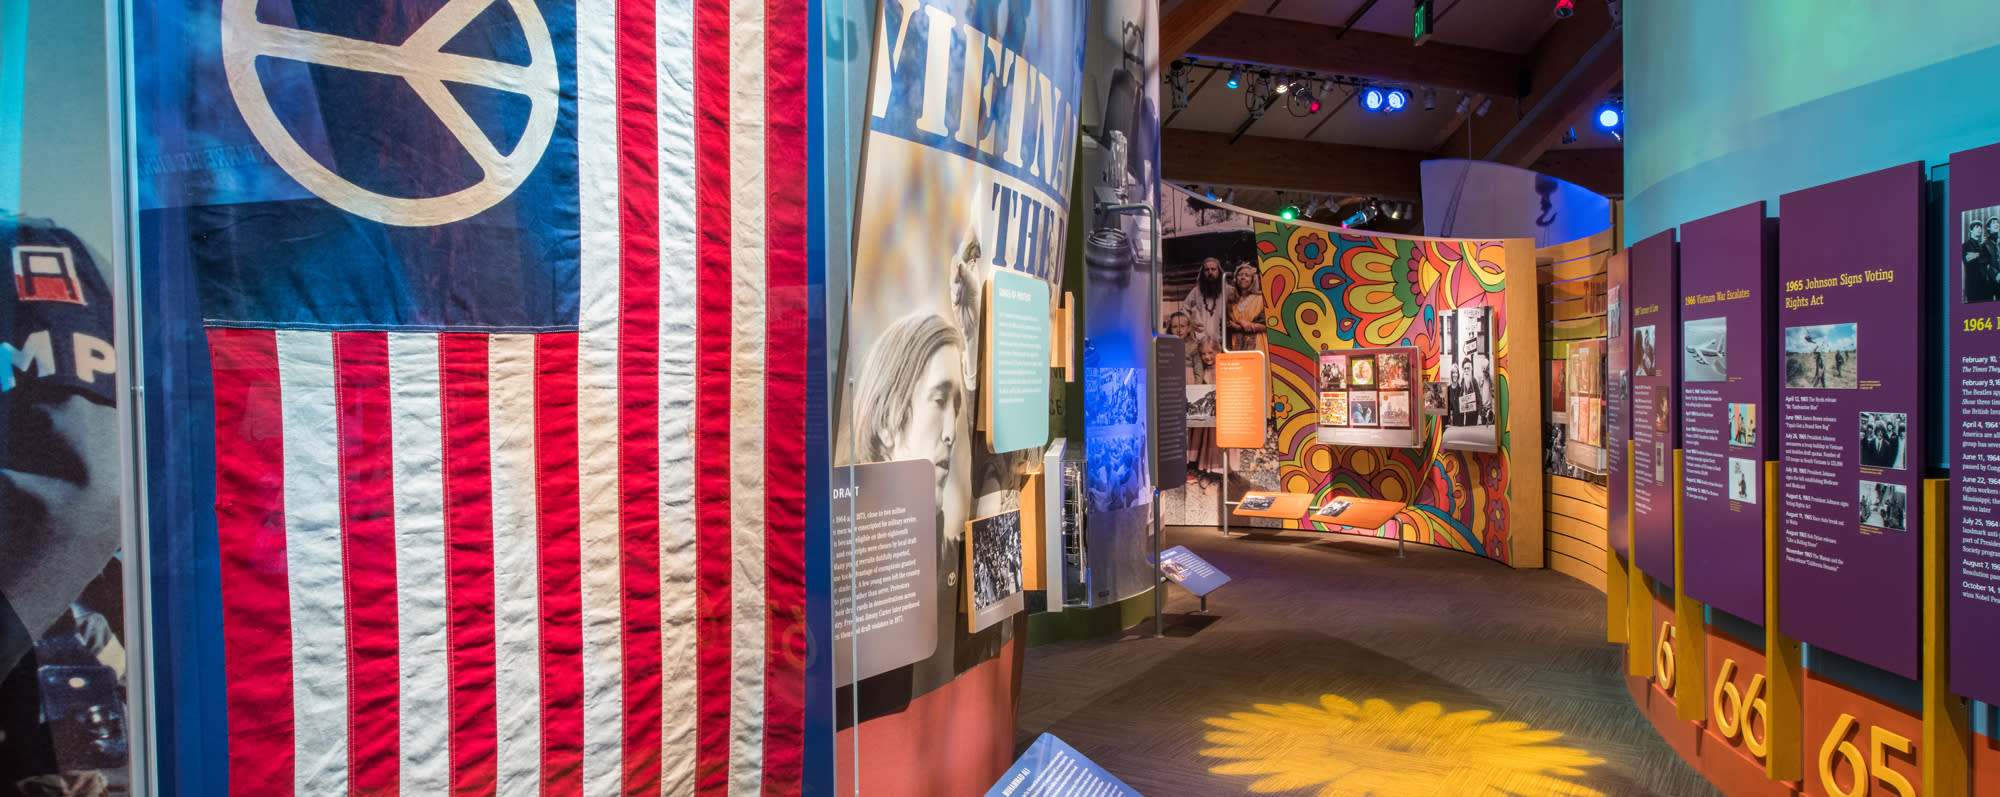 A look at the inside of the Museum at Bethel Woods displays and American flag with peace sign